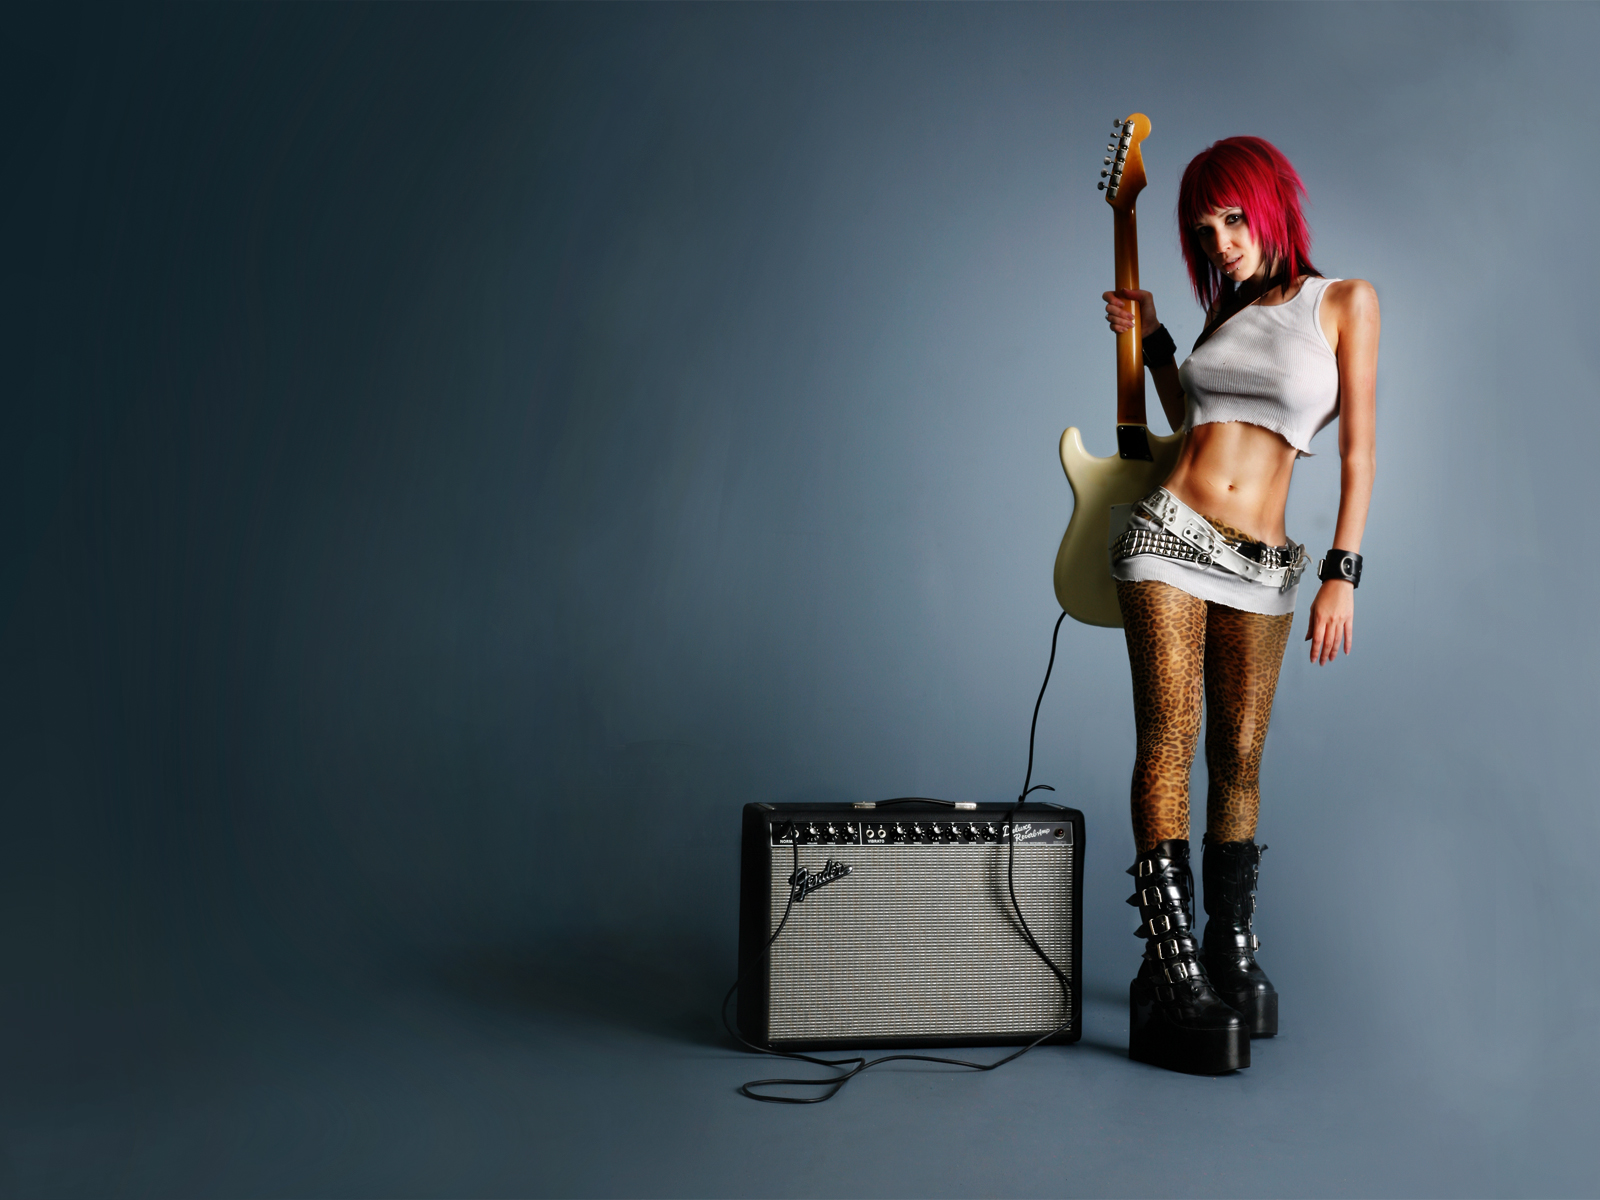 Sexy Redhead Punk Rock Girl With Guitar Wallpaper